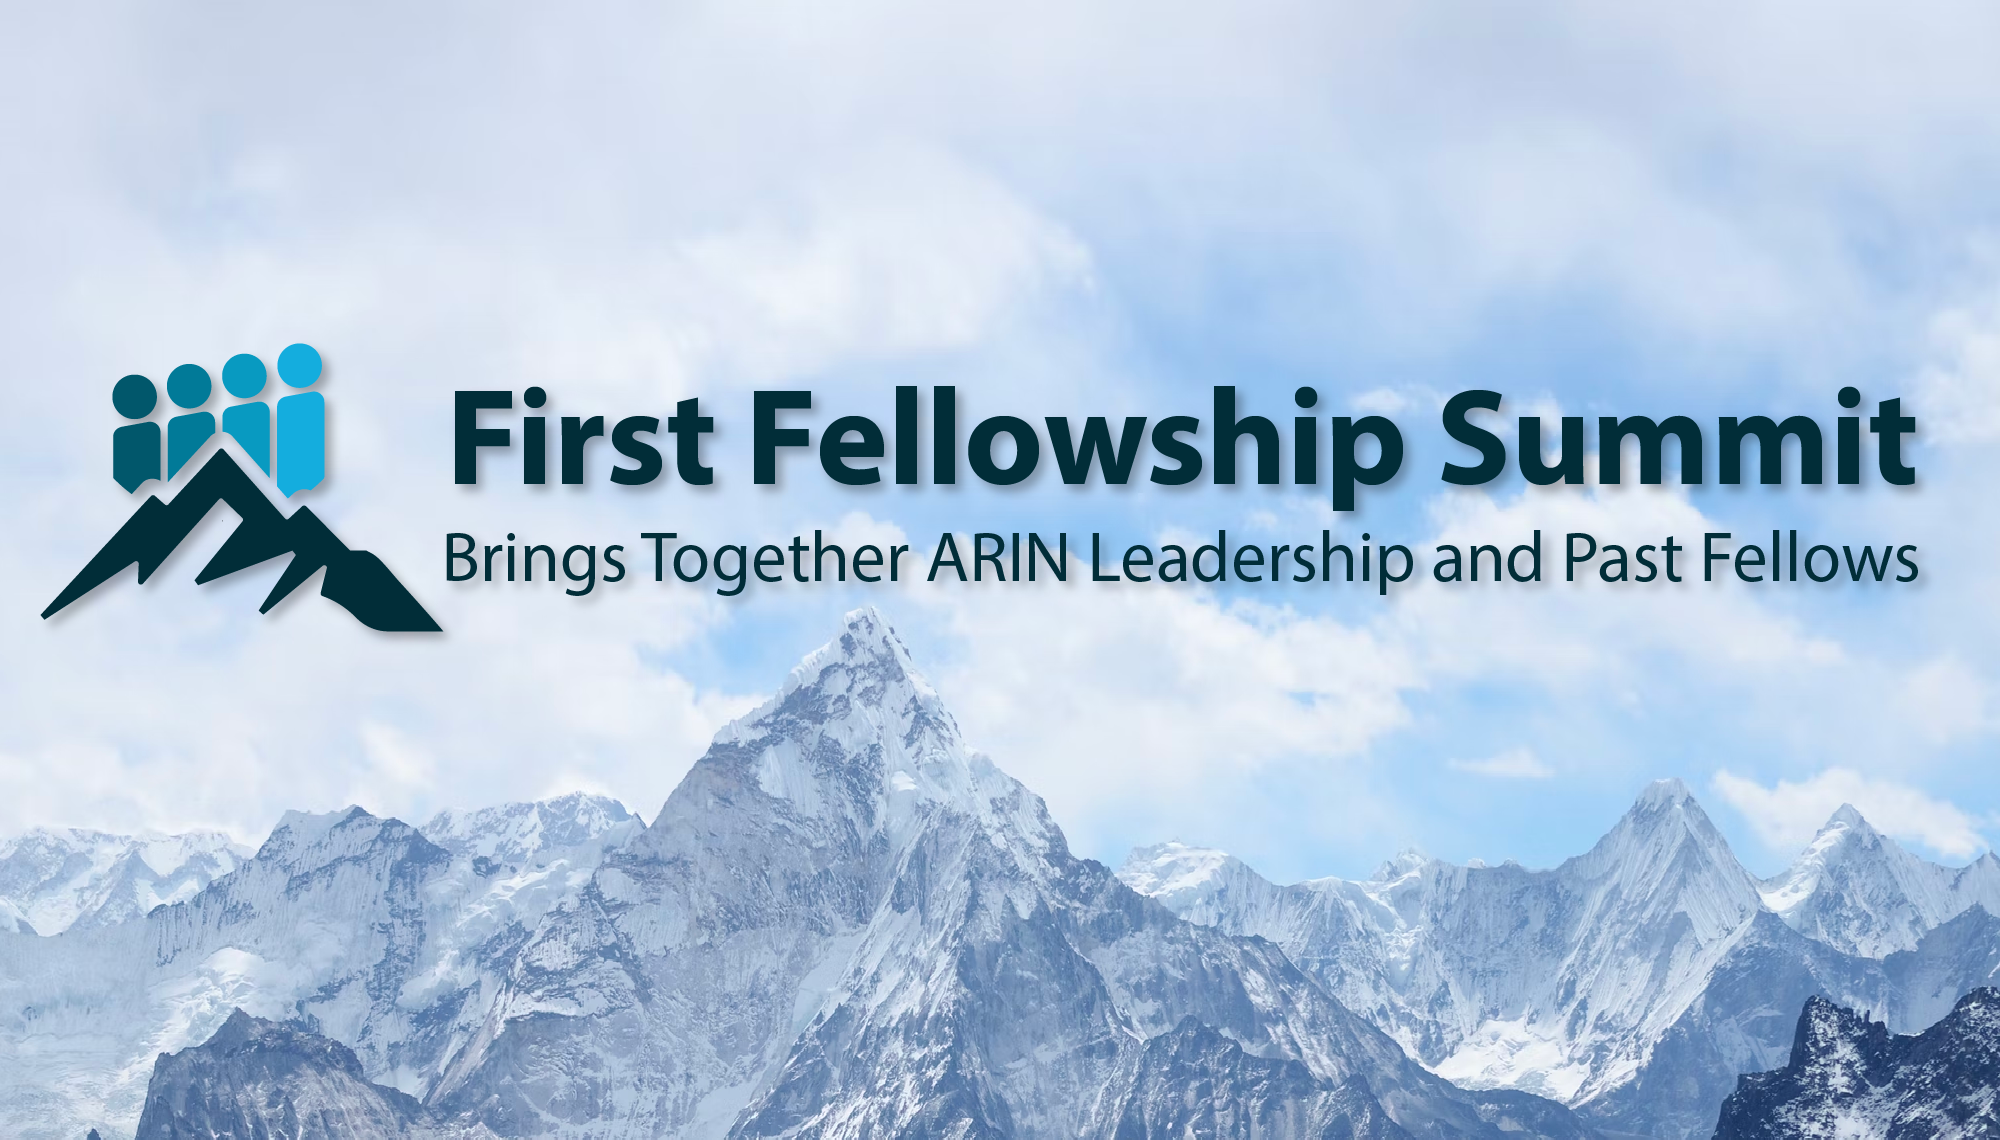 First Fellowship Summit Brings Together ARIN Leadership and Past Fellows